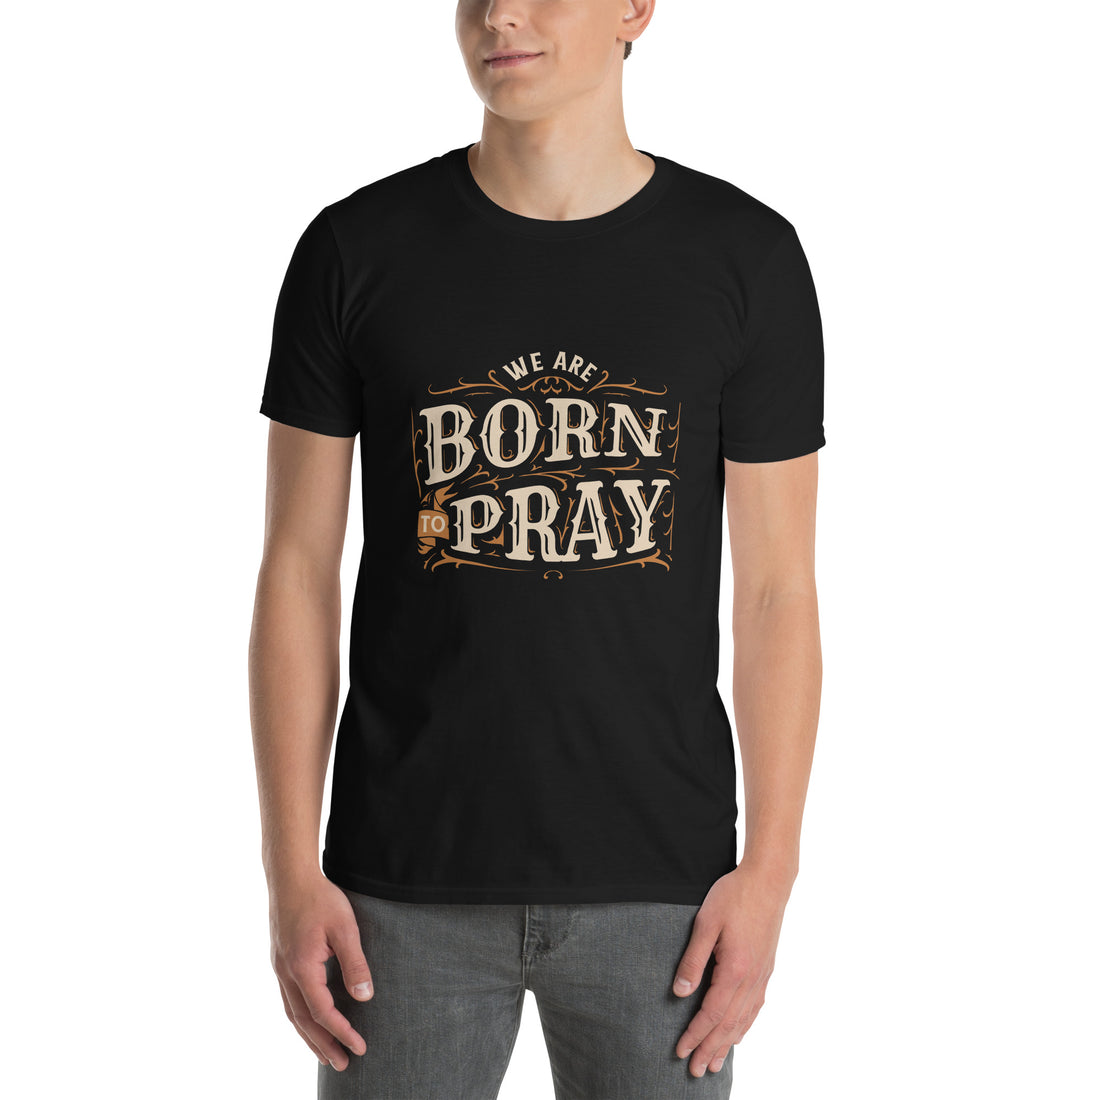 &quot;BORN TO PRAY&quot; T-Shirt Image: &quot;Born to Pray - Religious Short-Sleeve T-Shirt: Your Staple of Comfort and Faith.&quot;